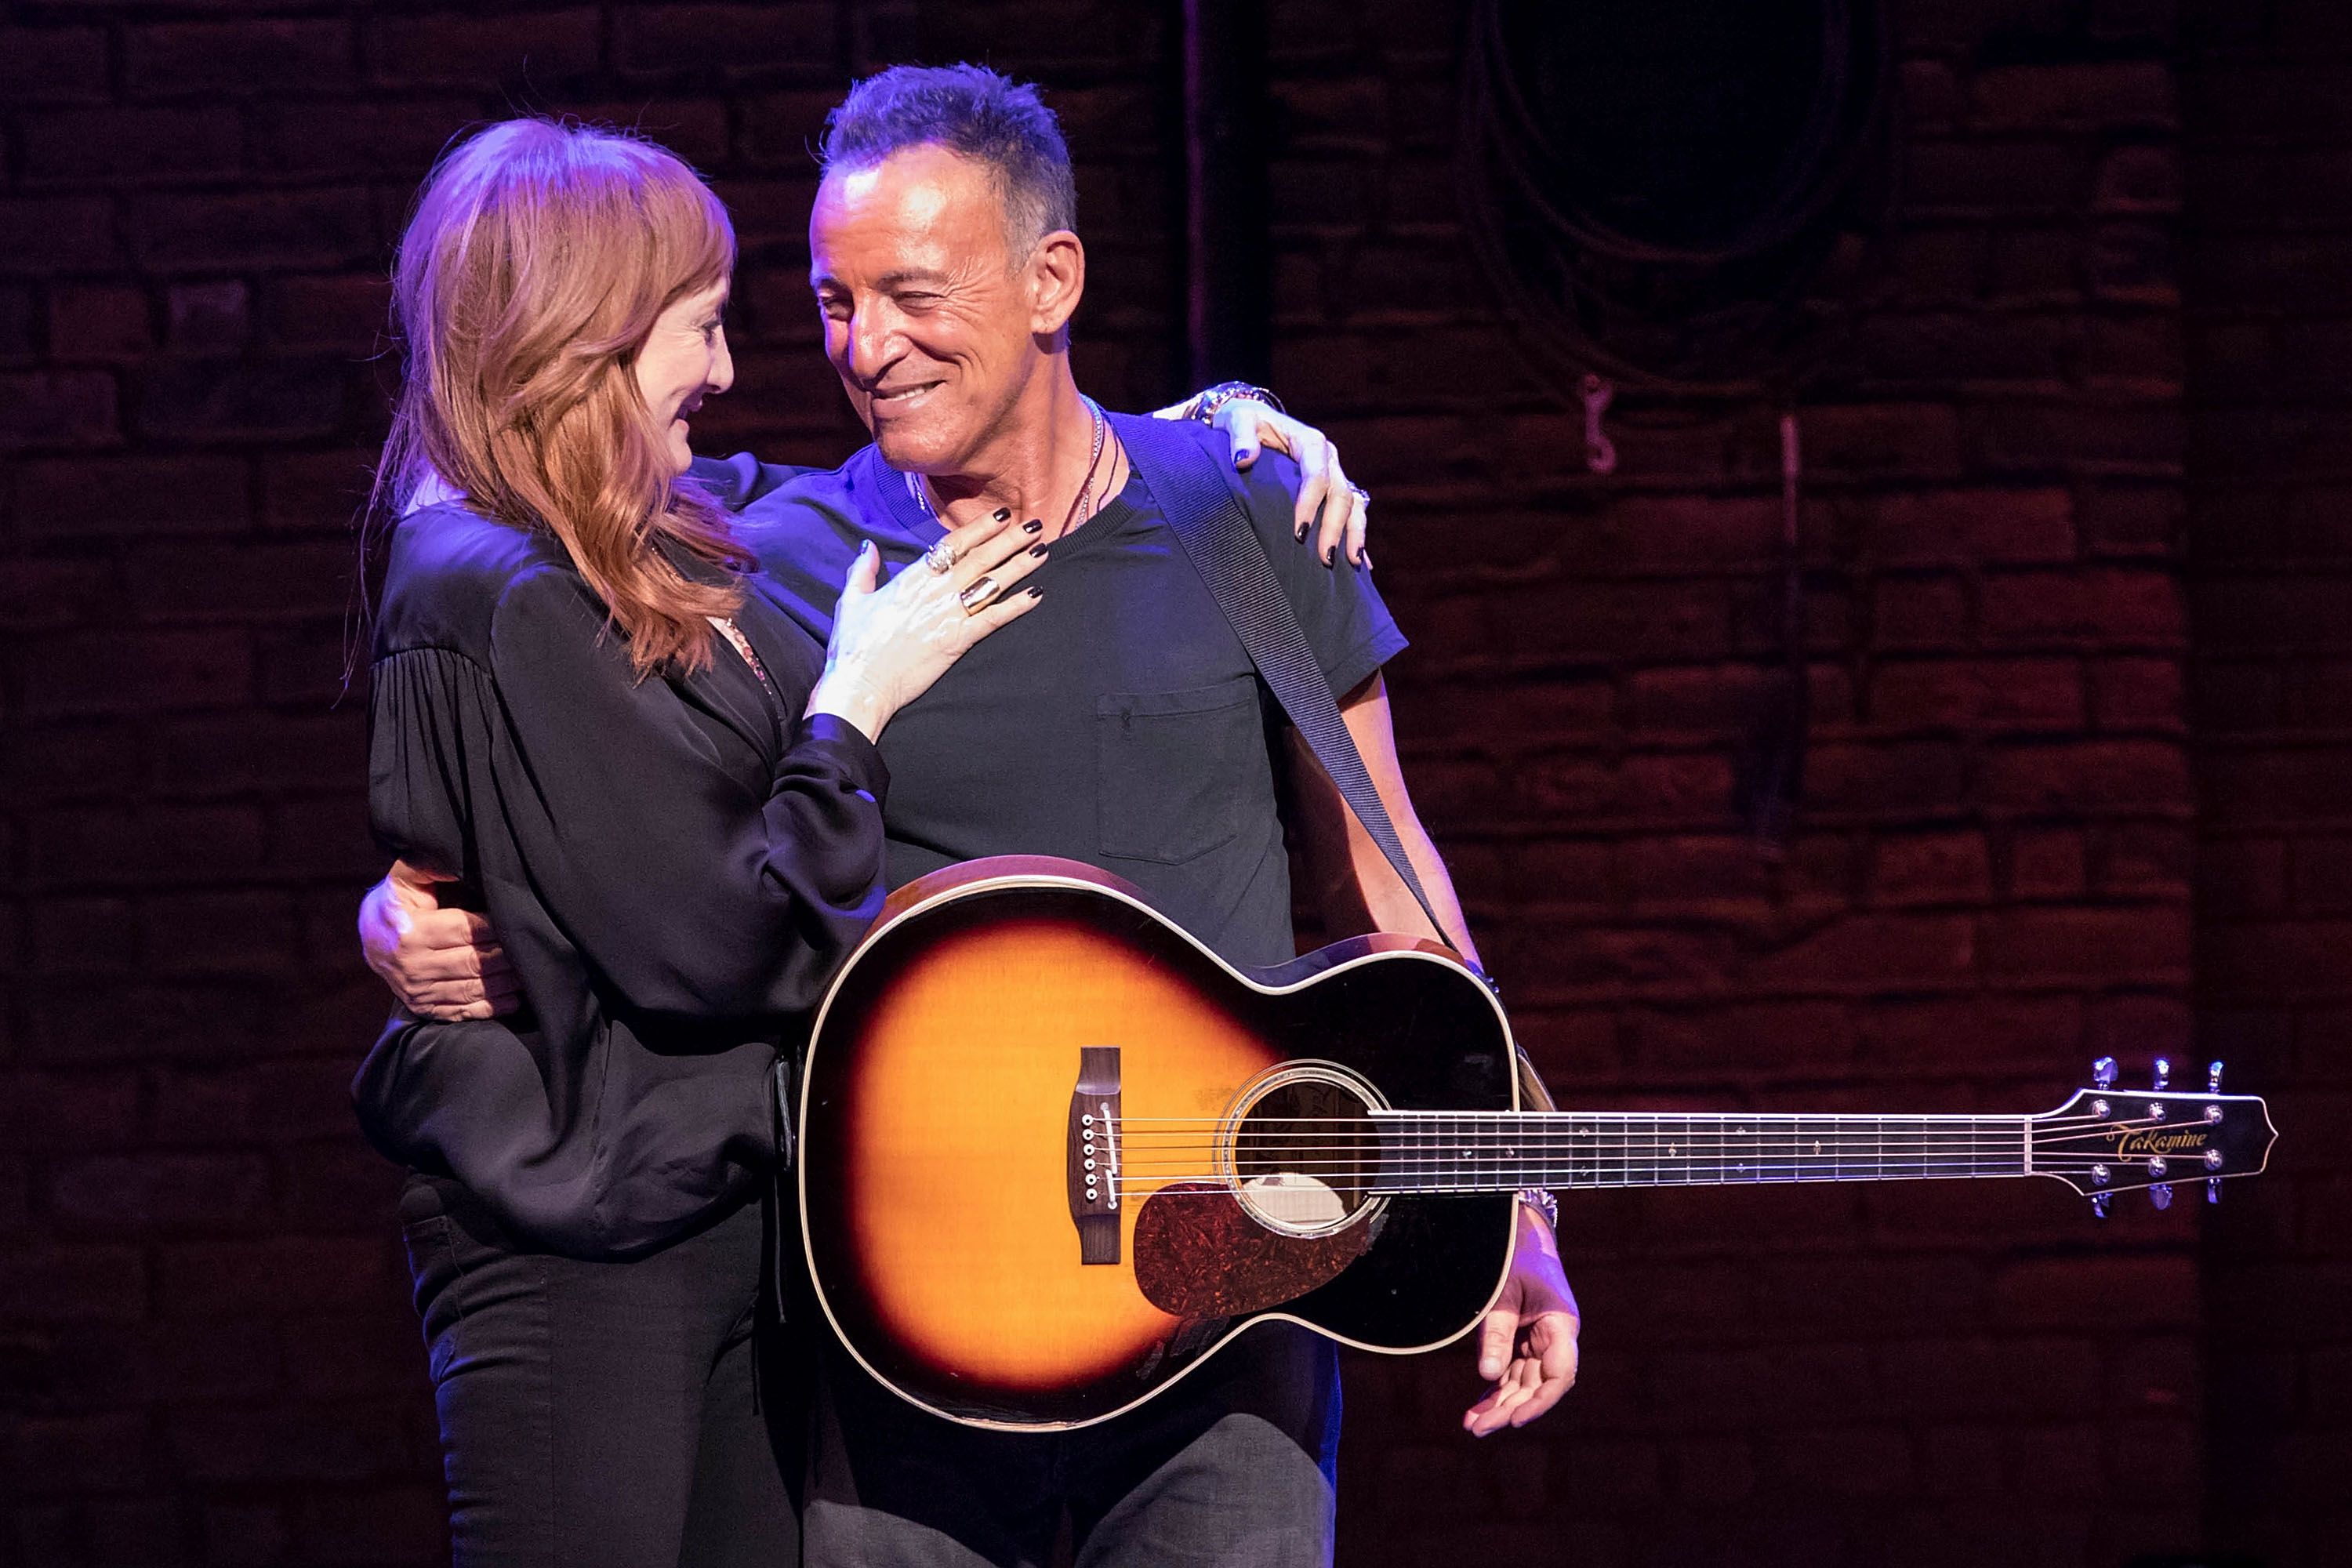 Bruce Springsteen and Patti Scialfa's Love Story and Timeline